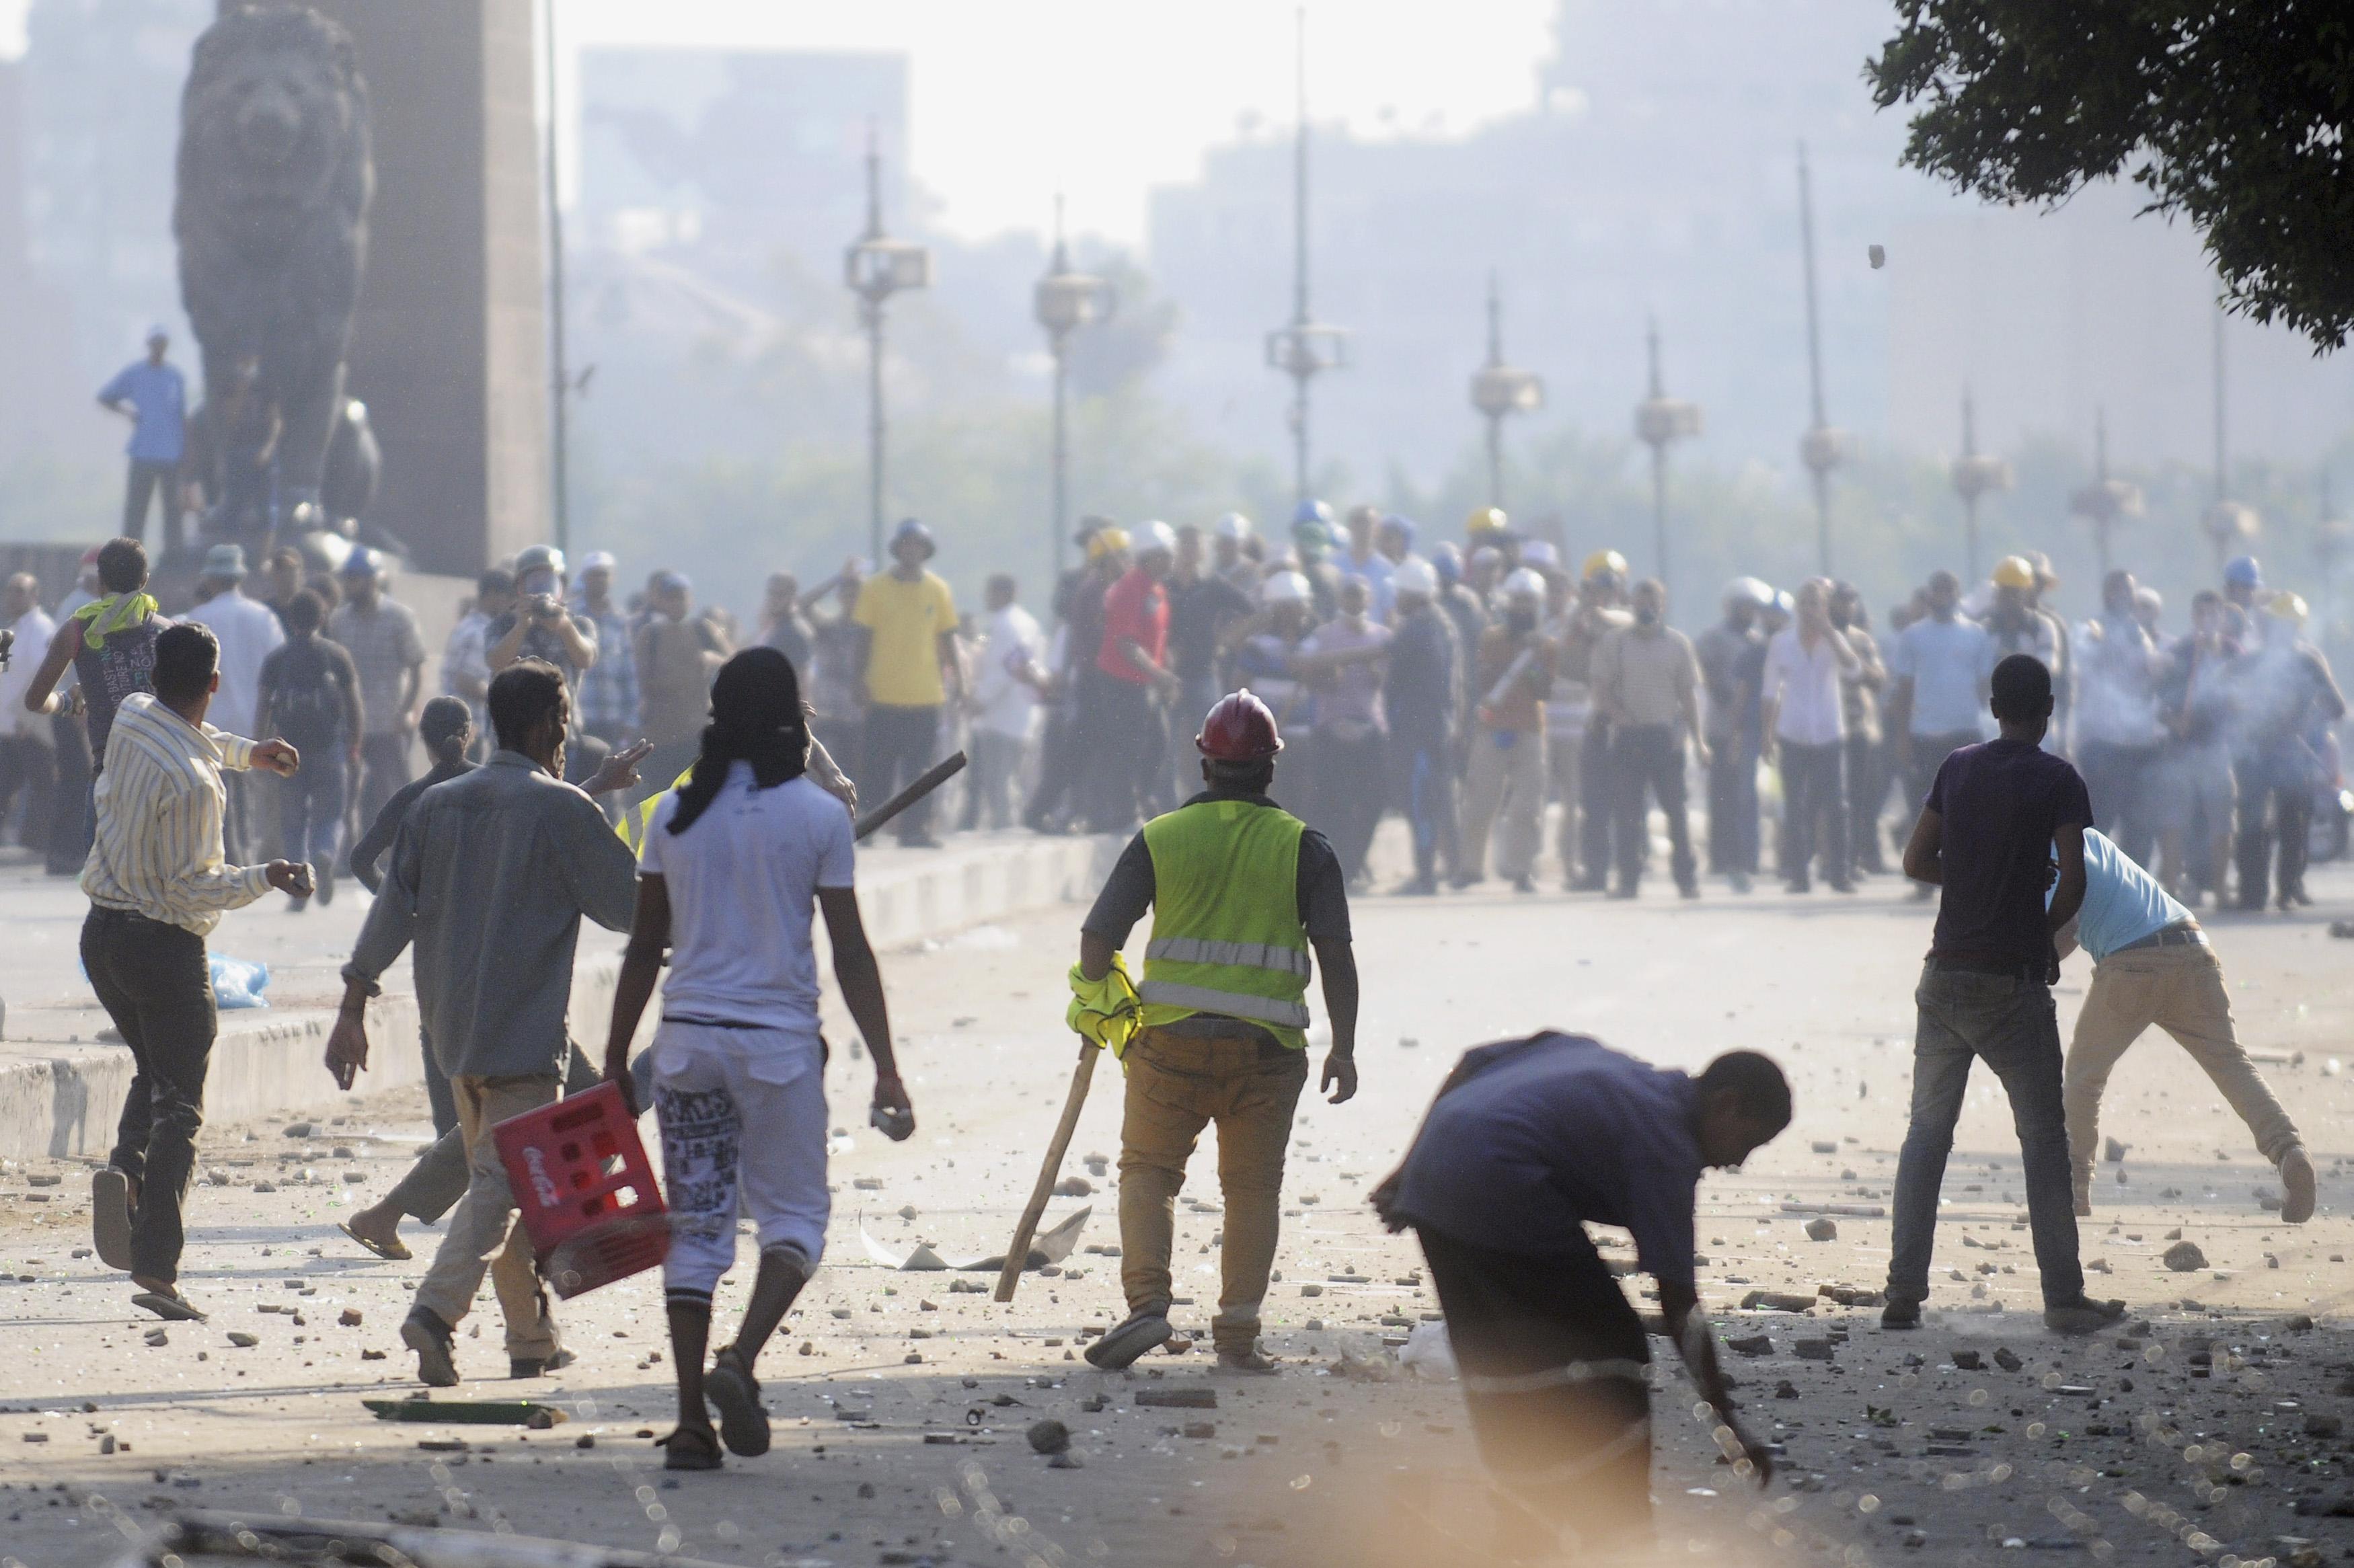 One woman killed in Friday's clashes